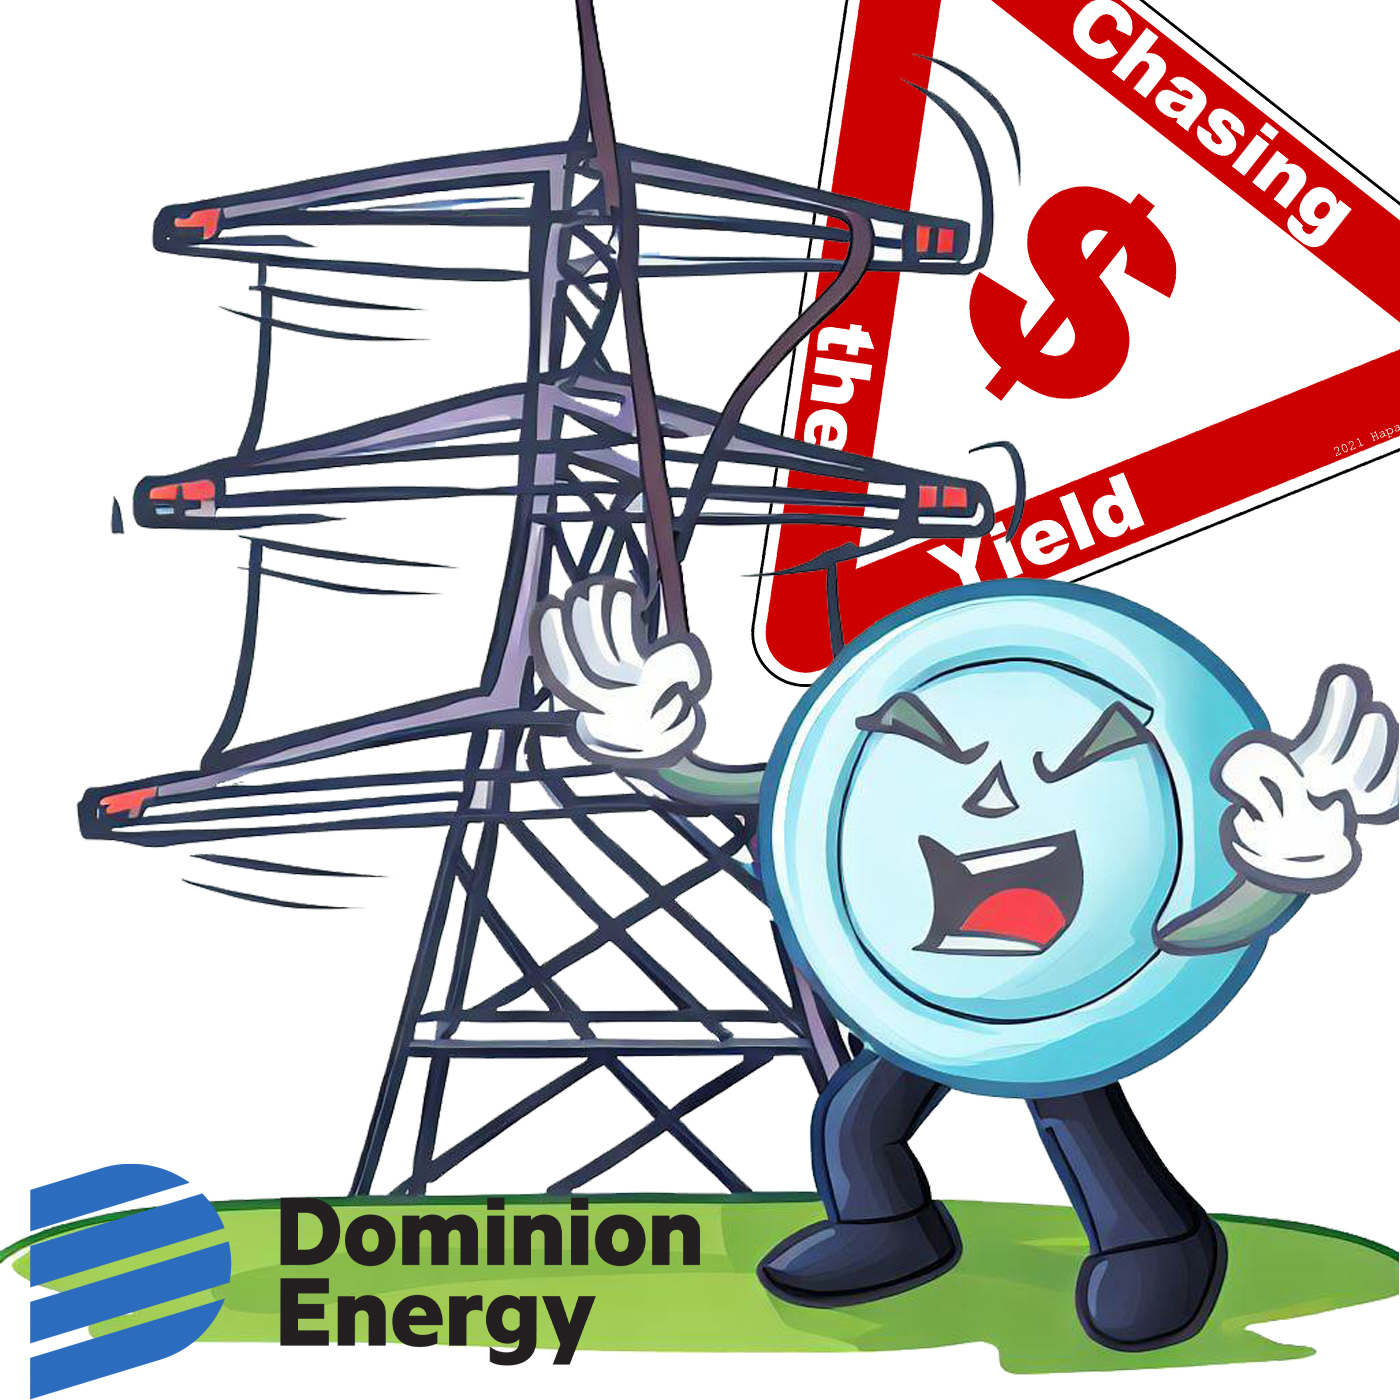 Dividend Safe as Dominion Energy Wraps Up Strategic Review; Payout Ratio Above Target